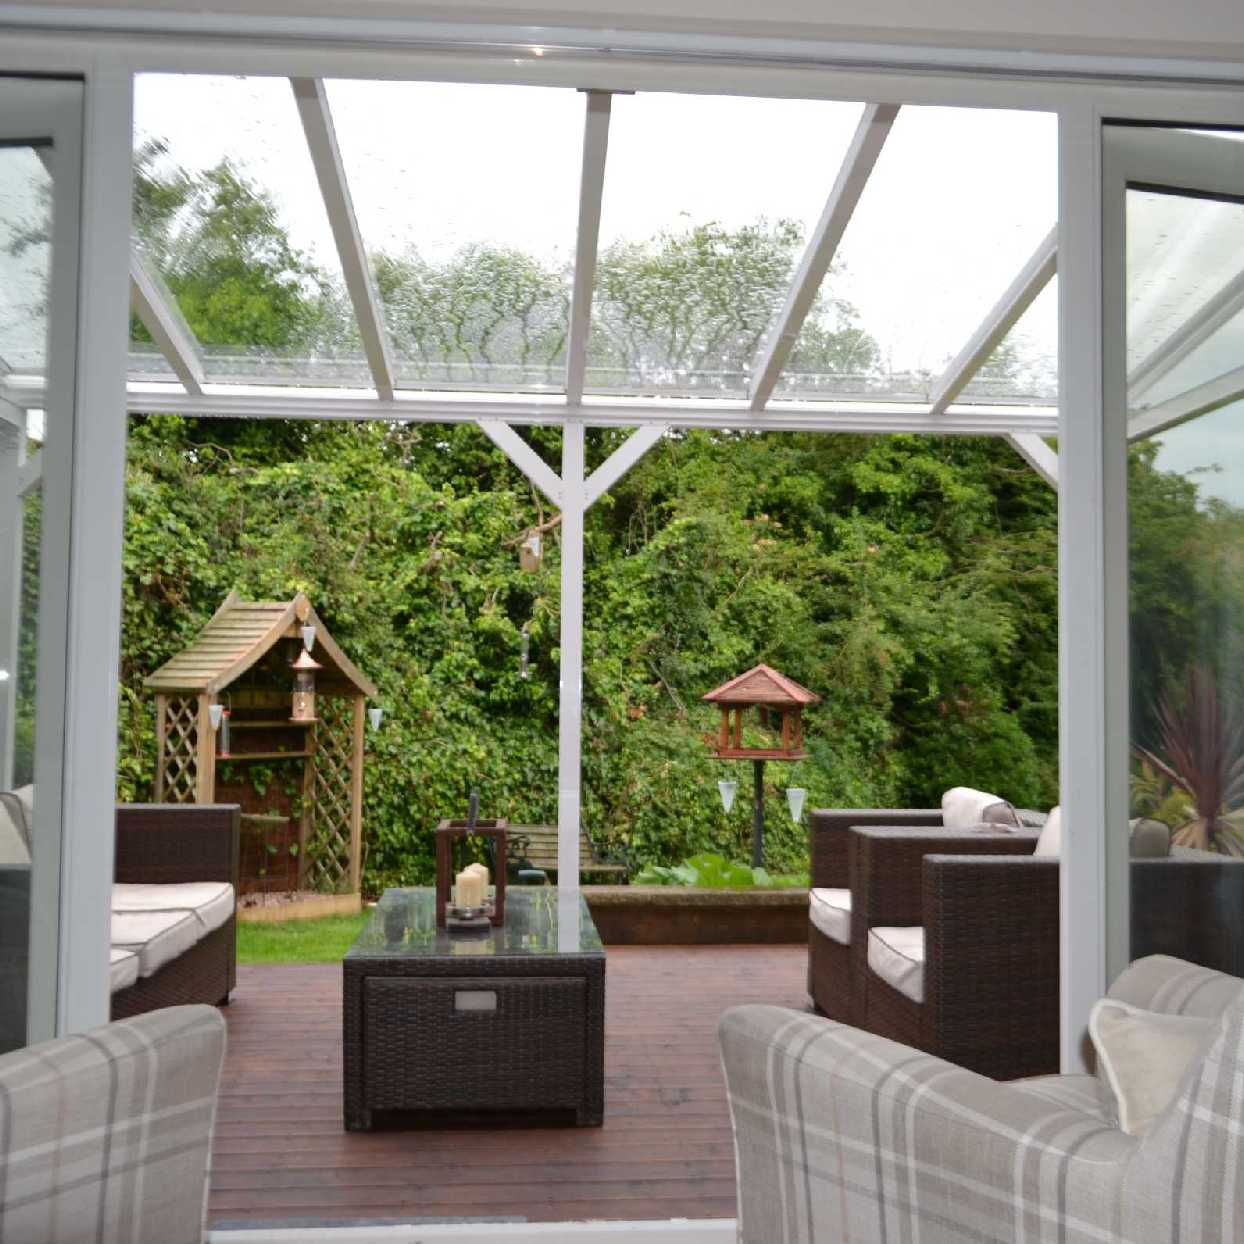 Buy Omega Smart Free-Standing, White MonoPitch Roof Canopy with 6mm Glass Clear Plate Polycarbonate Glazing - 7.0m (W) x 2.0m (P), (8) Supporting Posts online today